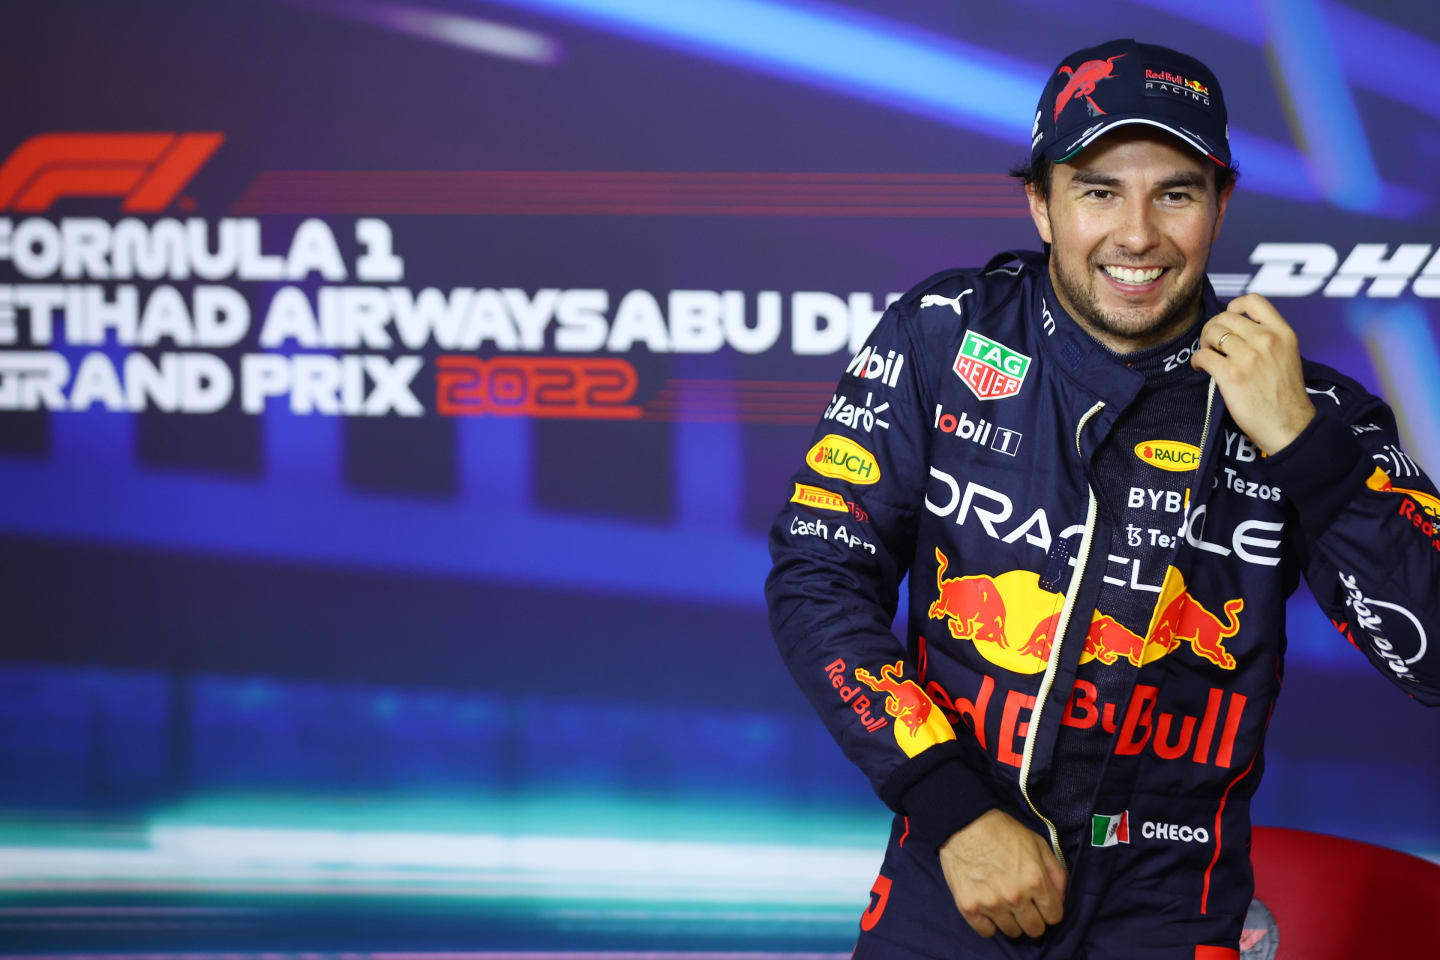 ABU DHABI, UNITED ARAB EMIRATES - NOVEMBER 19: Second placed qualifier Sergio Perez of Mexico and Oracle Red Bull Racing attends a drovers press conference following qualifying ahead of the F1 Grand Prix of Abu Dhabi at Yas Marina Circuit on November 19, 2022 in Abu Dhabi, United Arab Emirates. (Photo by Dan Istitene/Getty Images)